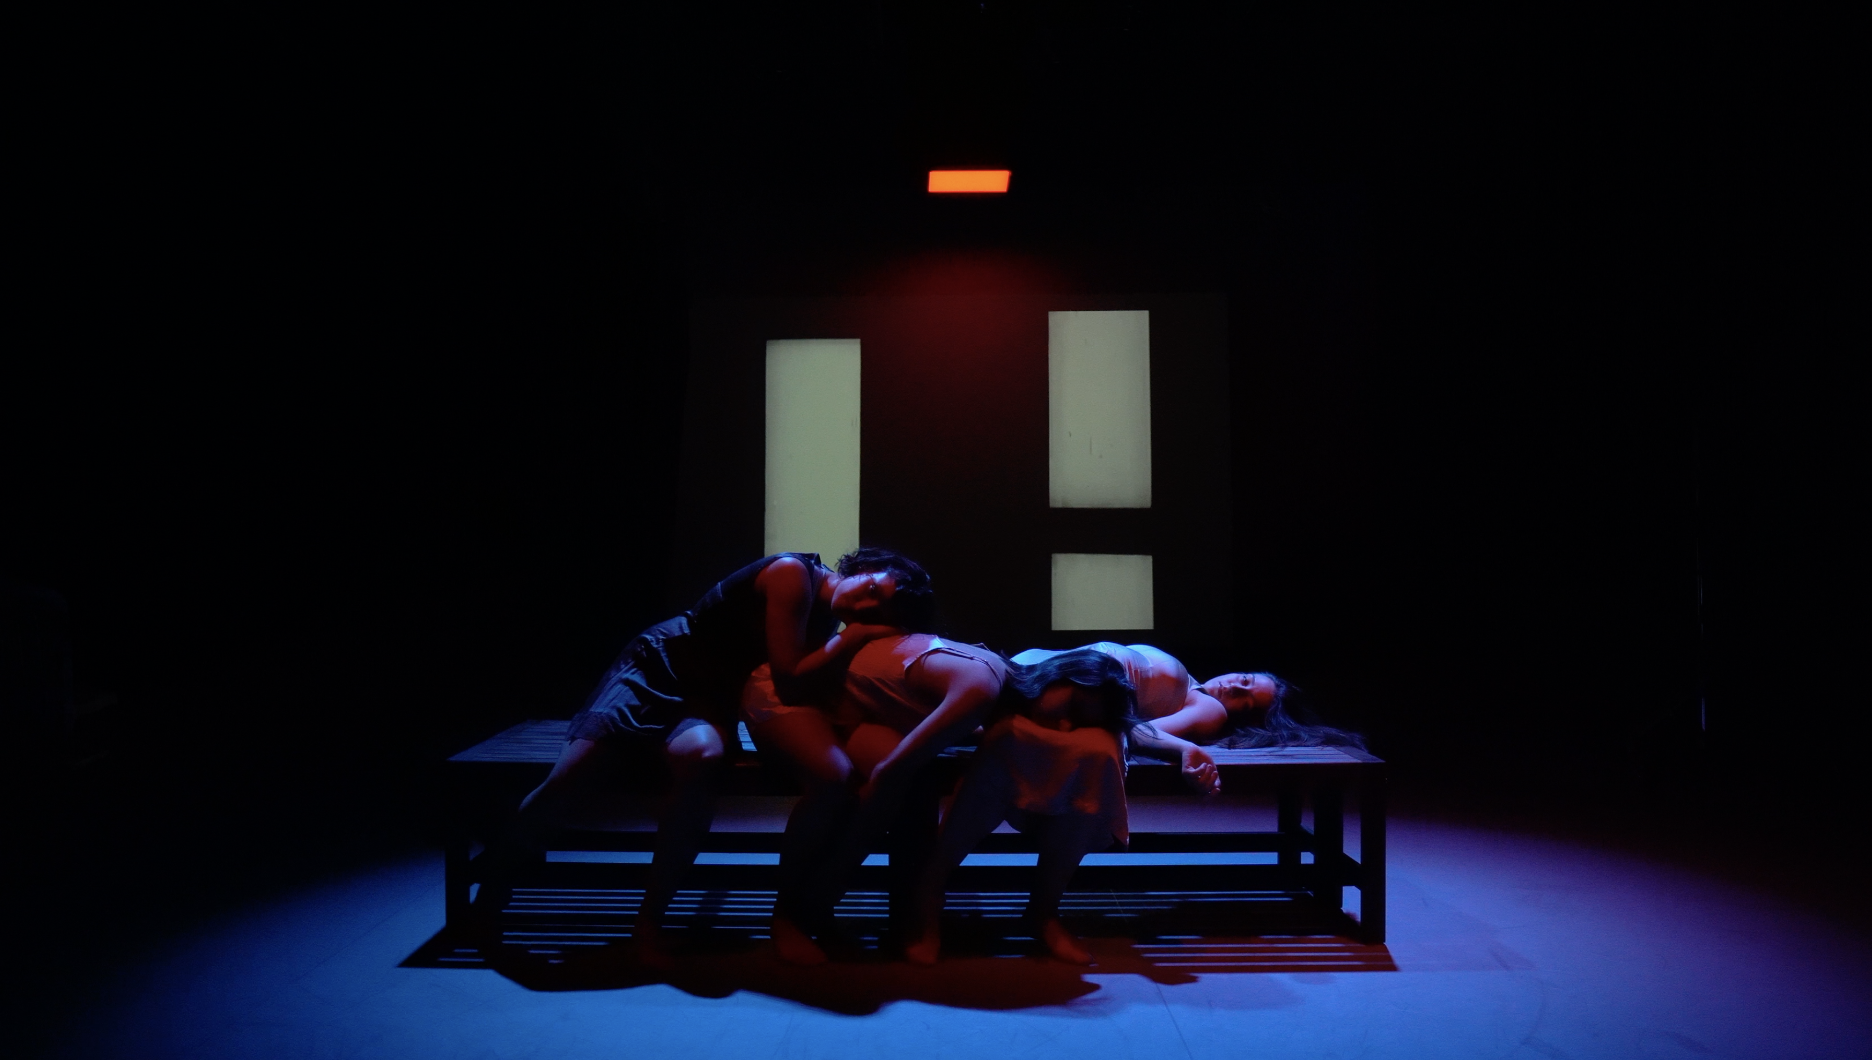 Three people leaning to the right on a bench lying on top of each other under colorful lights